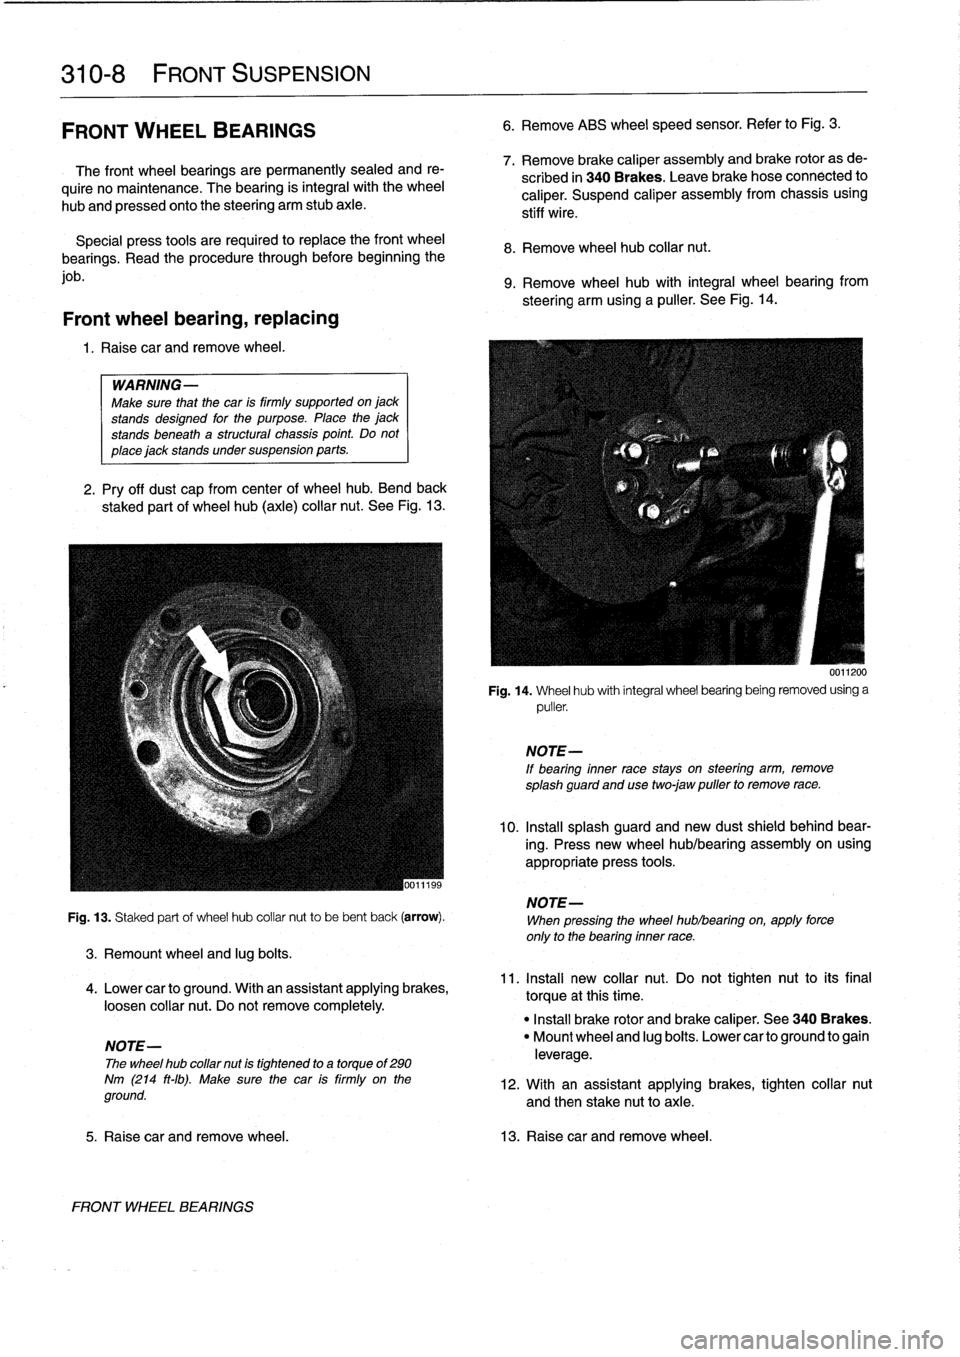 BMW 328i 1994 E36 Workshop Manual 
310-
8

	

FRONT
SUSPENSION

FRONT
WHEEL
BEARINGS

The
front
wheel
bearings
are
permanently
sealed
and
re-

quire
no
maintenance
.
The
bearing
is
integral
with
the
wheel

hub
and
pressed
onto
the
ste